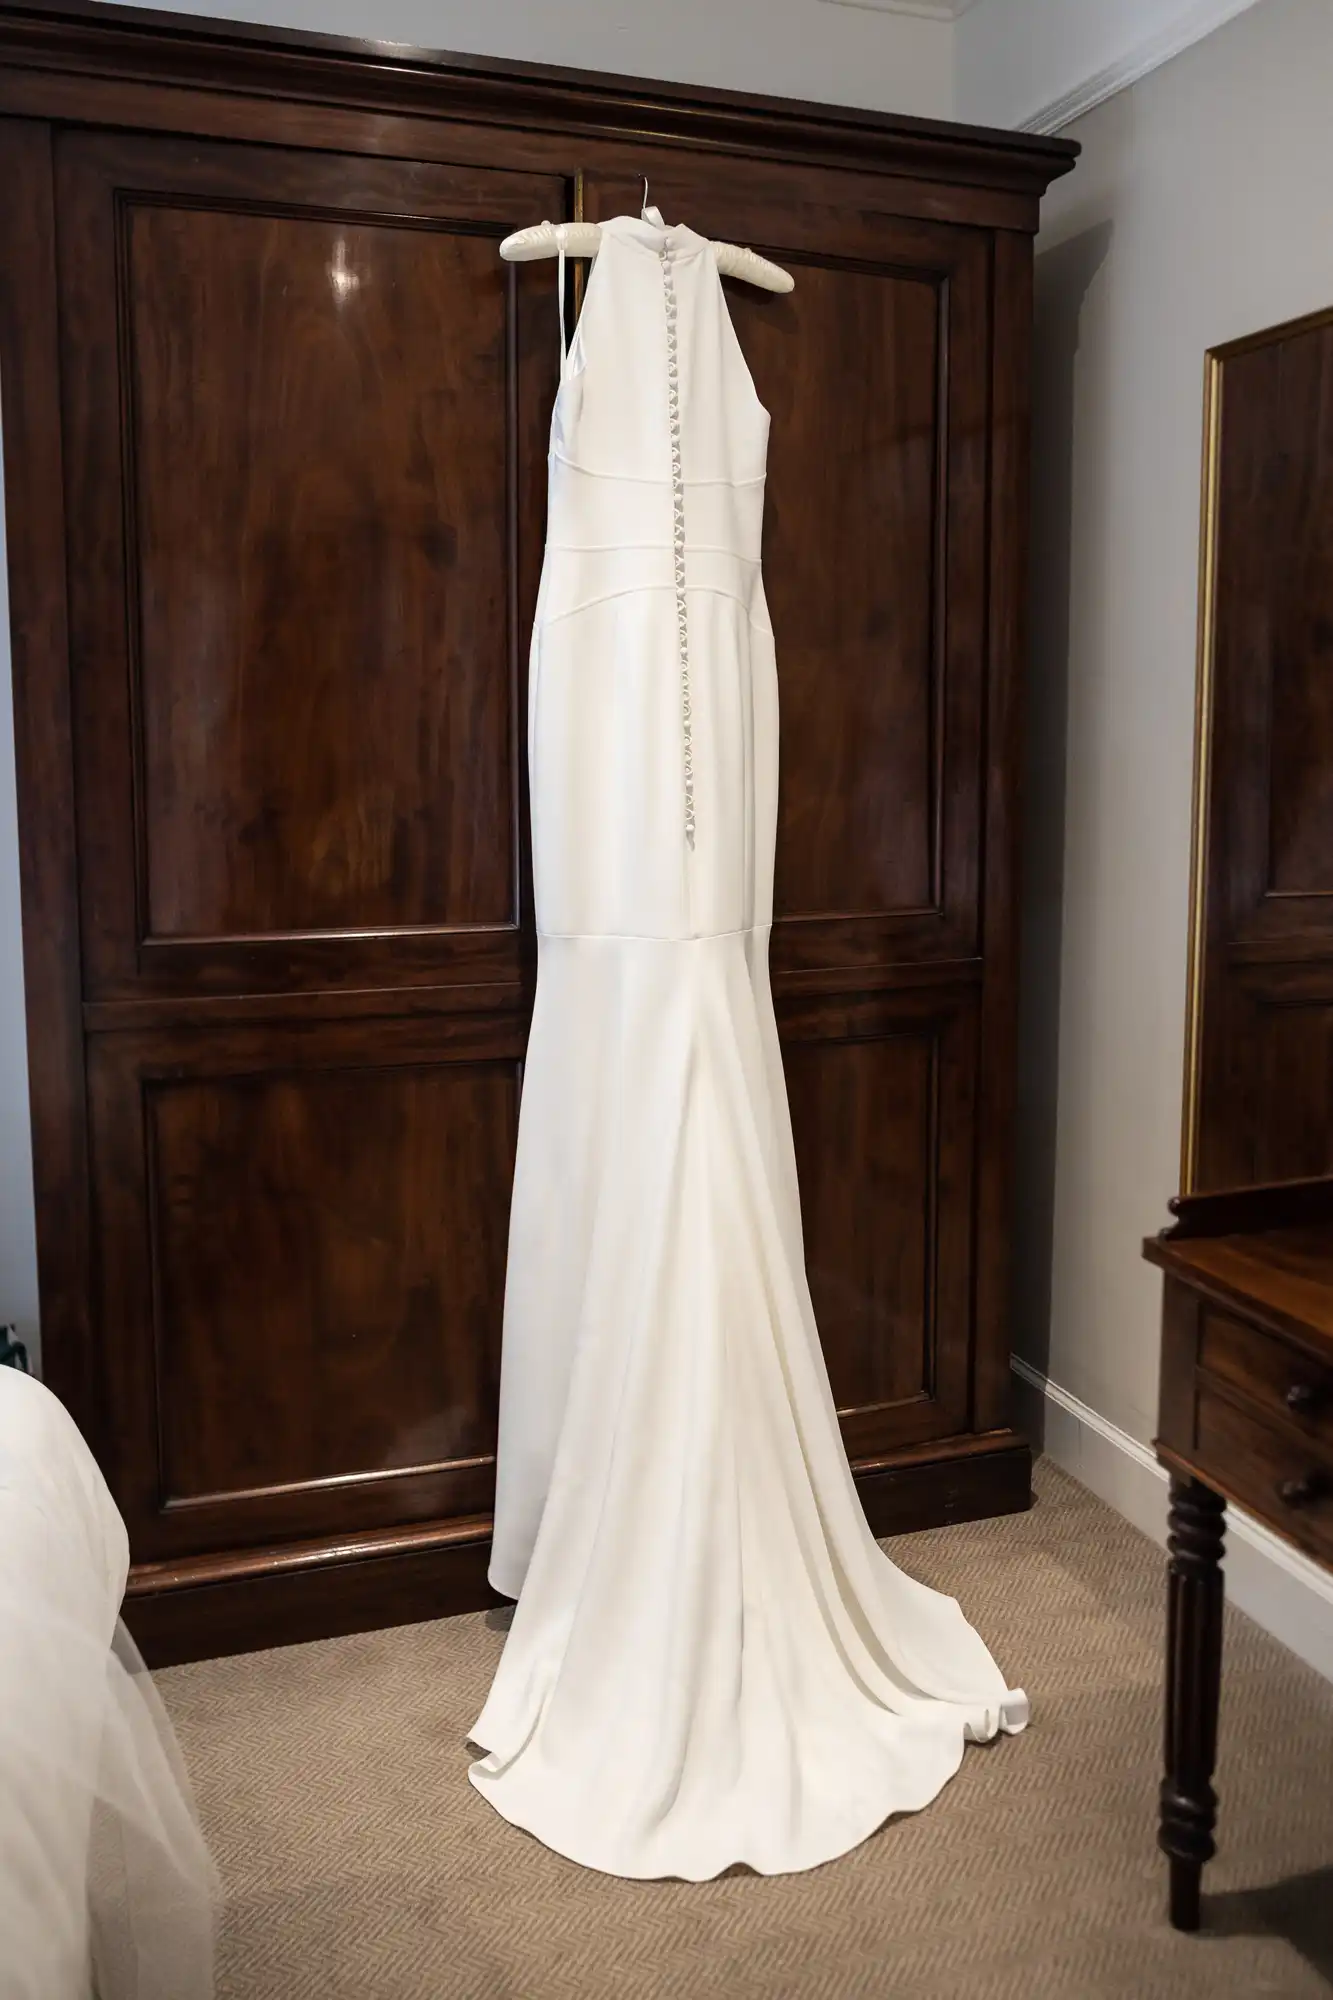 A long, elegant white wedding dress with detailed stitching hangs on a hanger against a dark wooden wardrobe in a room.